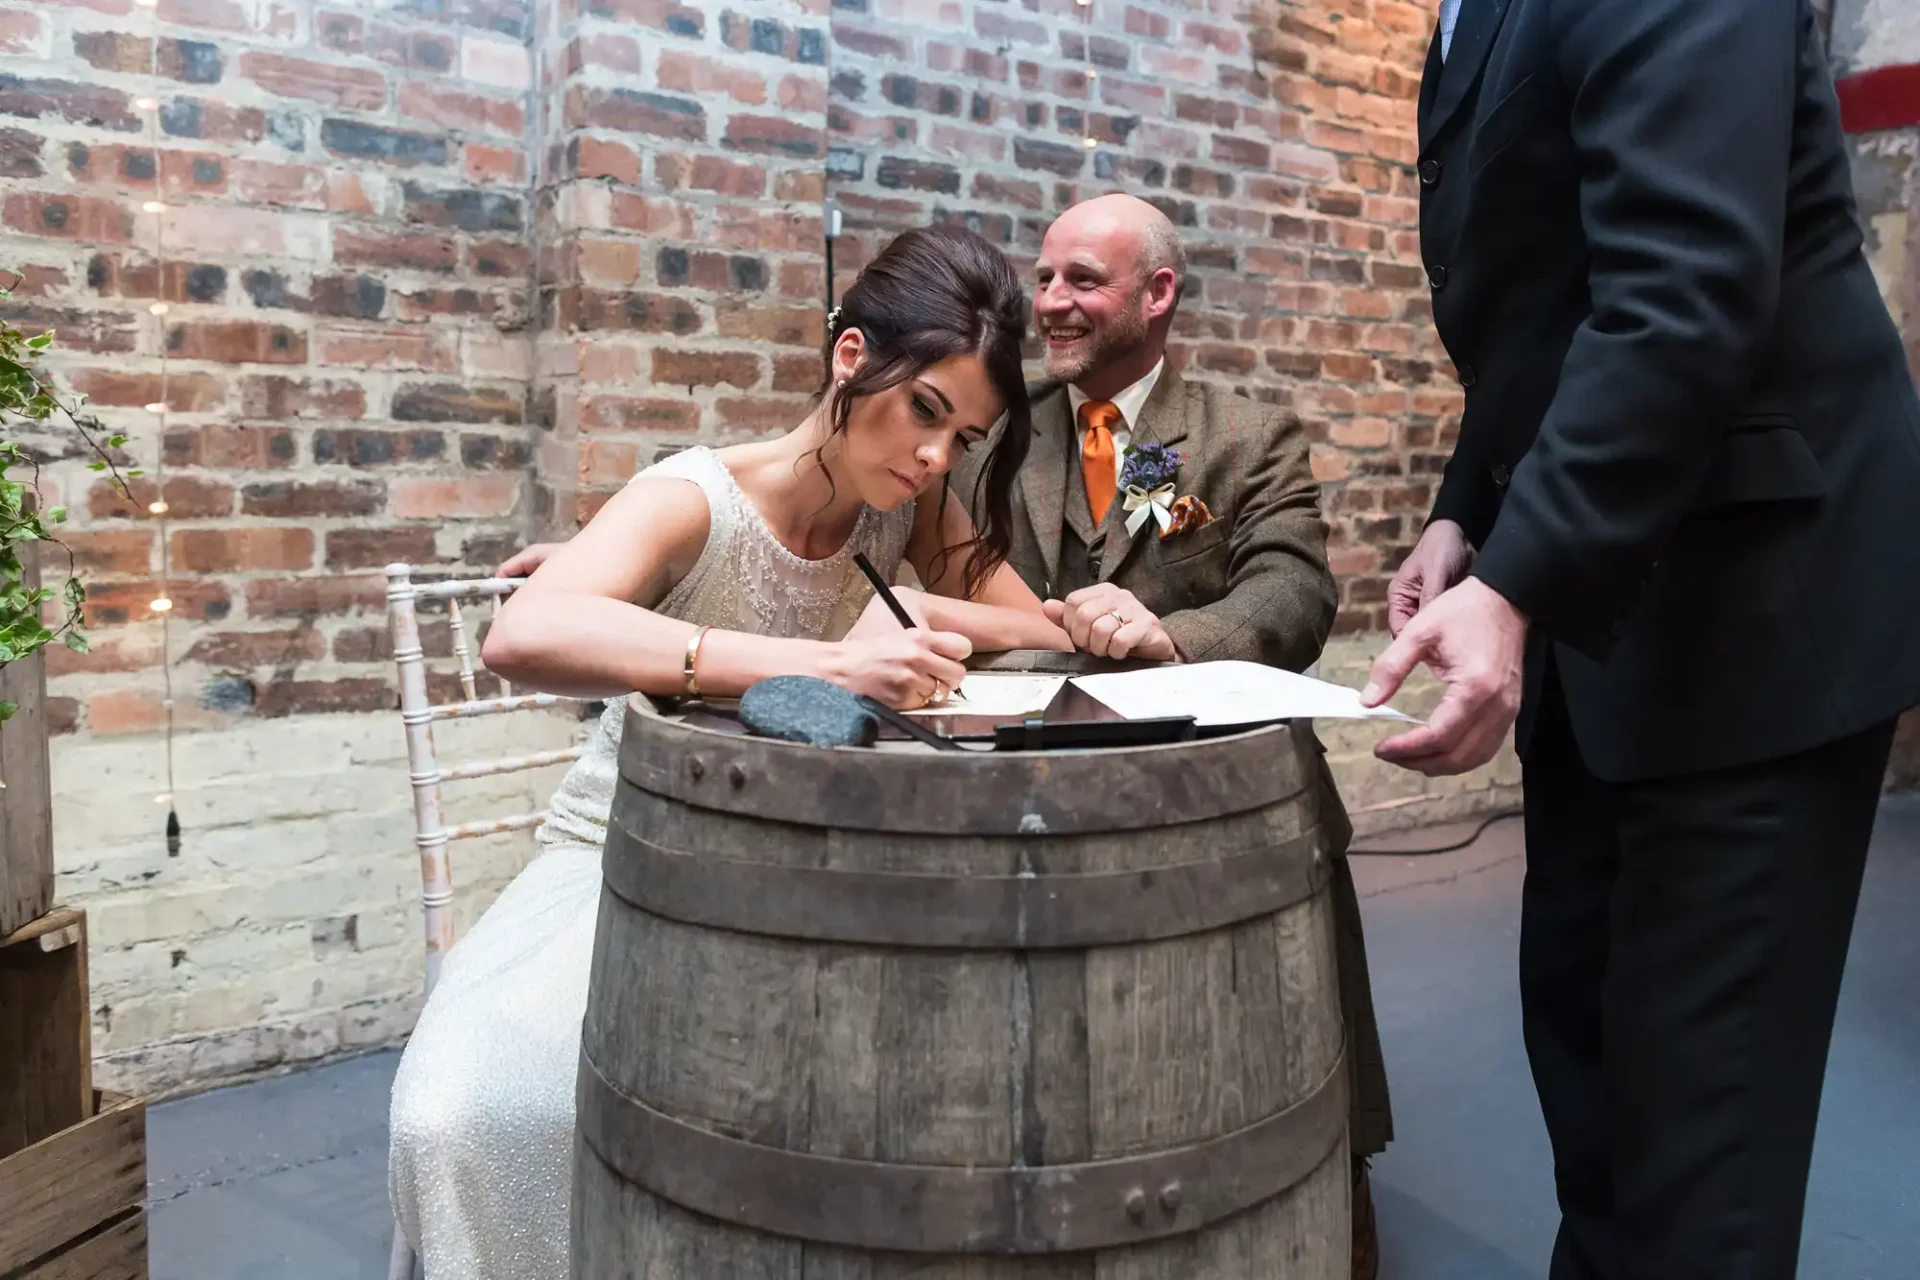 A bride and groom signing their marriage certificate on a barrel in a rustic brick-walled venue, with a man standing beside them.